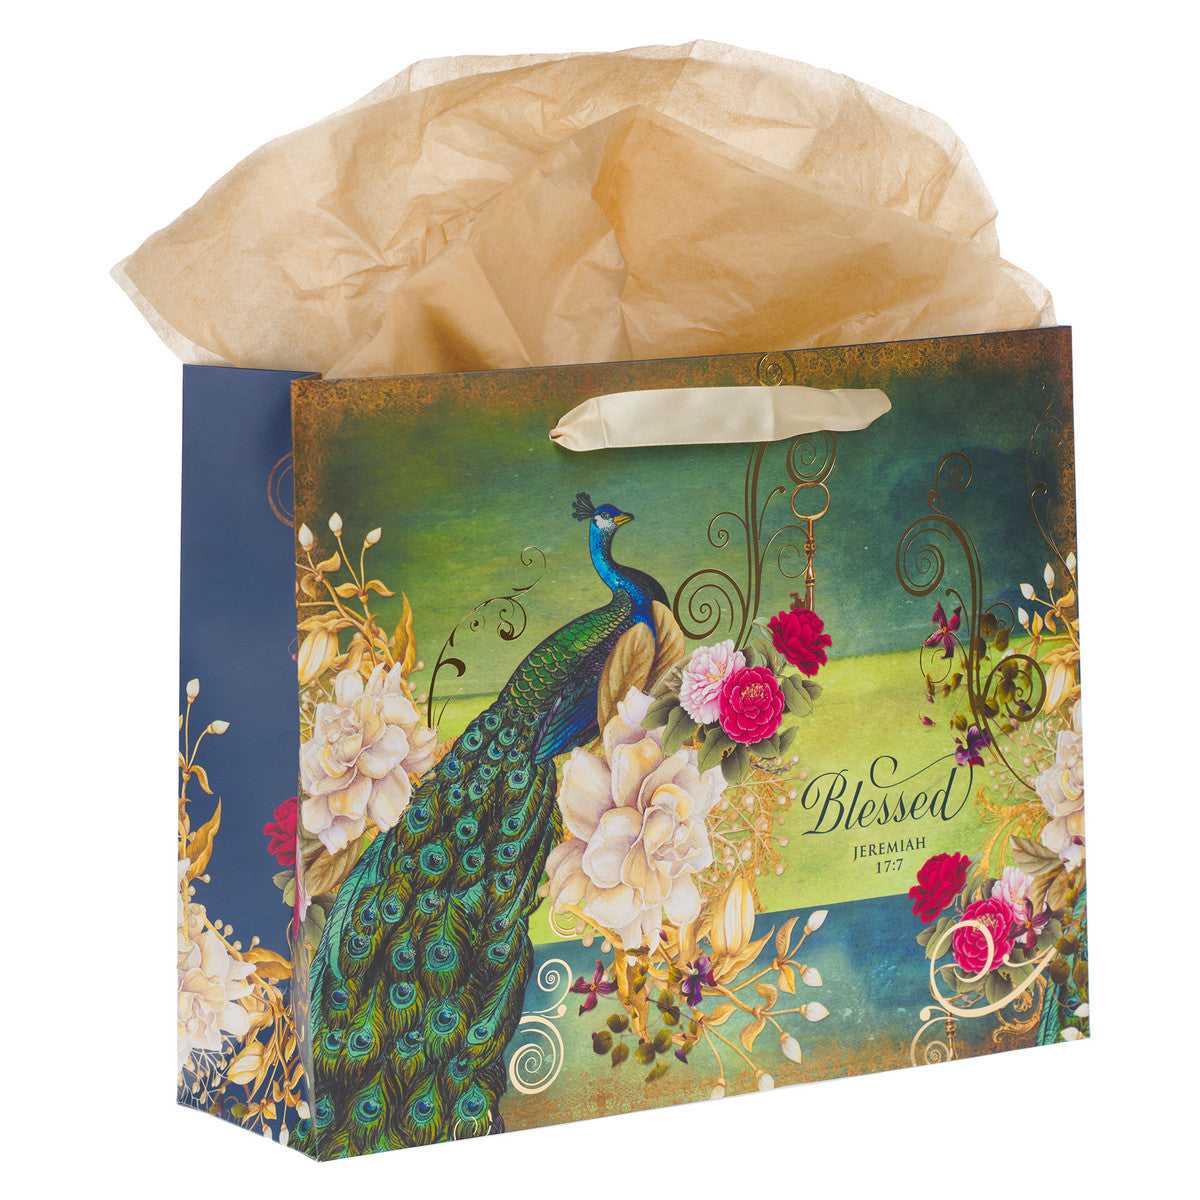 Blessed Blue Peacock Large Landscape Gift Bag with Card Set - Jeremiah 17:7